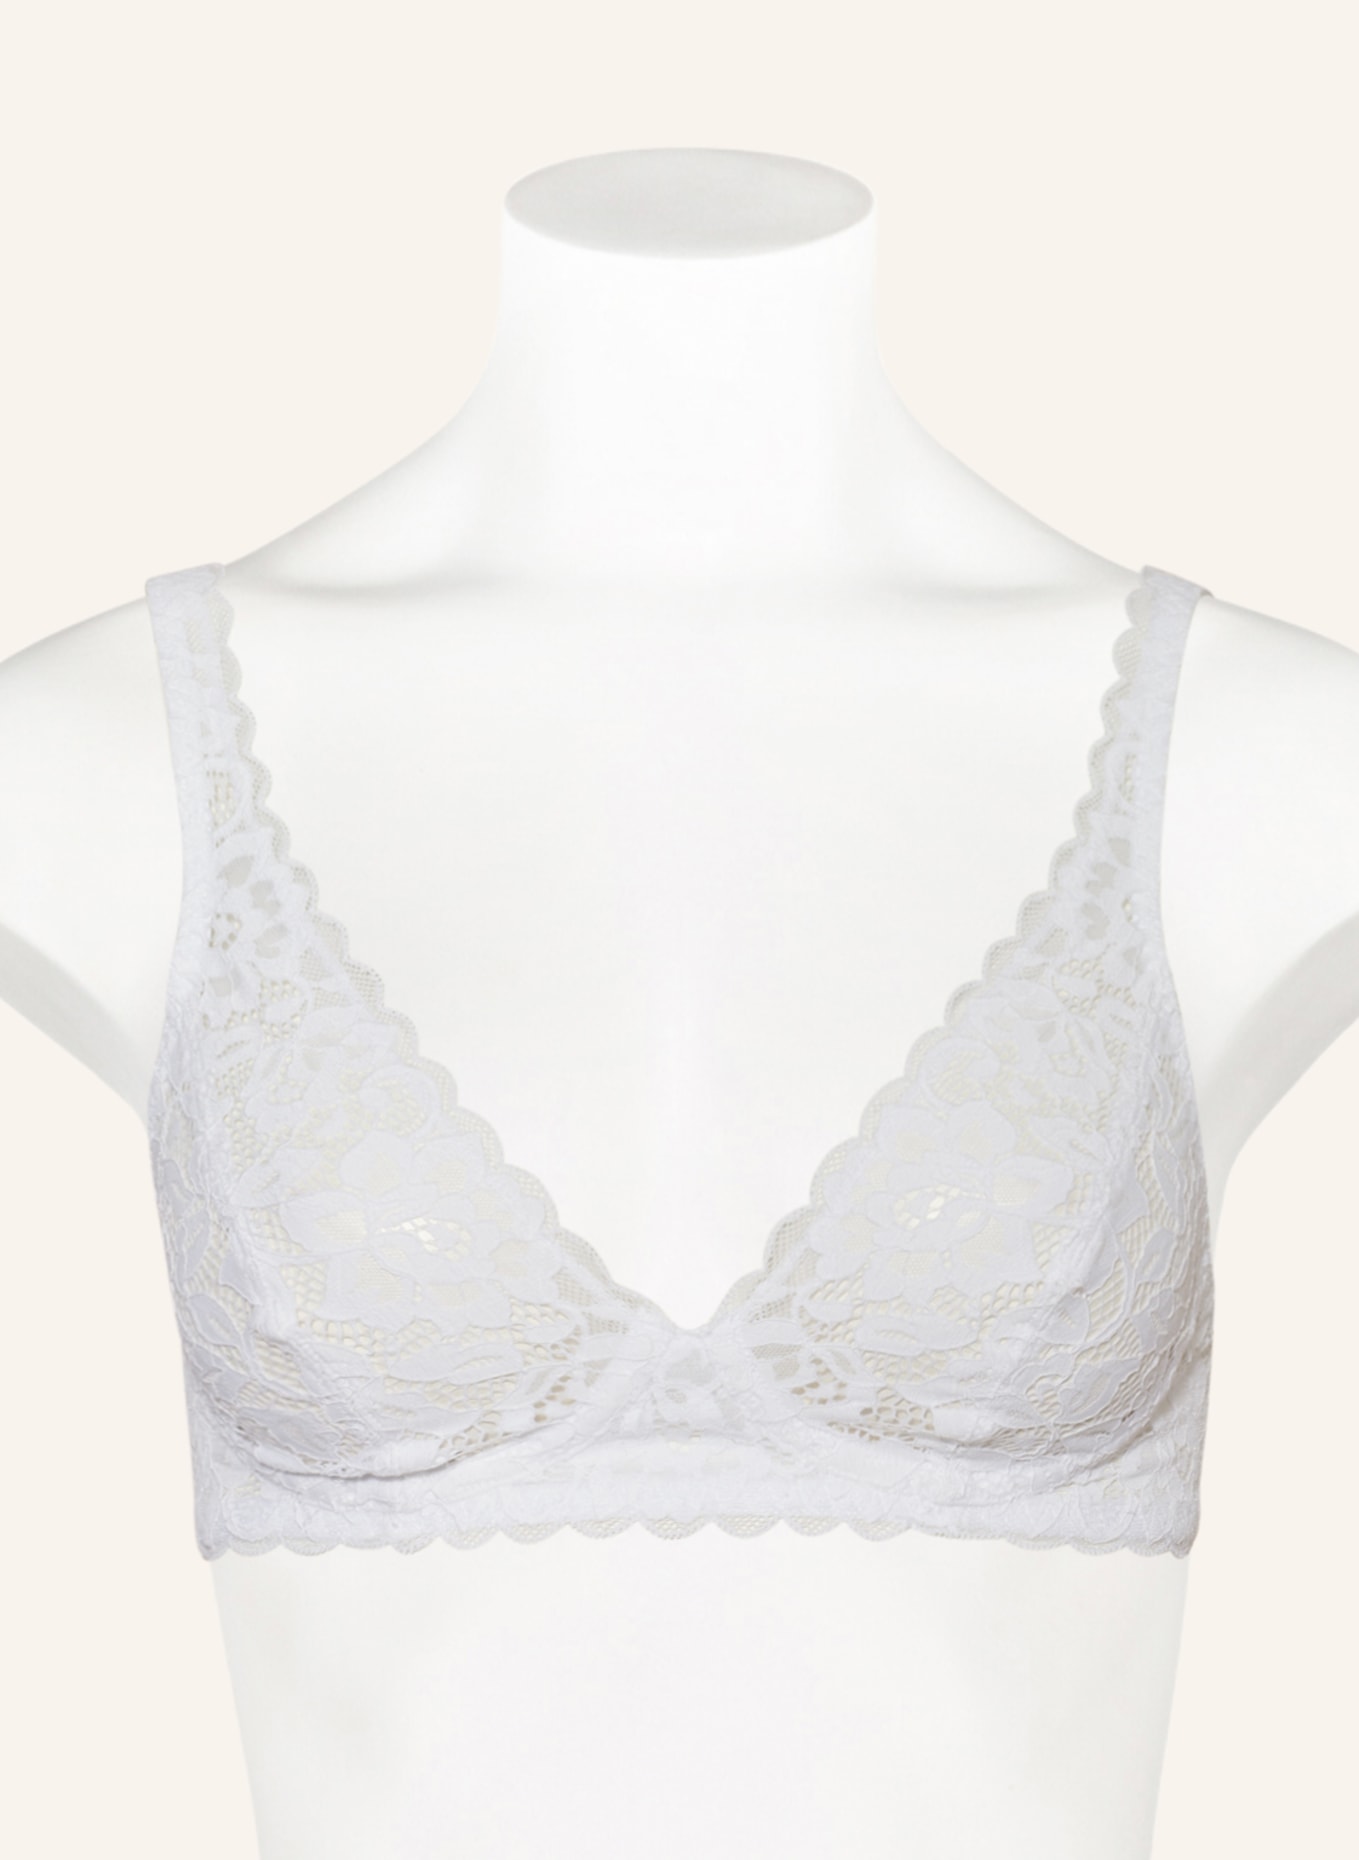 Women's Calida 04375 Natural Comfort Cotton Soft Cup Bra (White 34A)